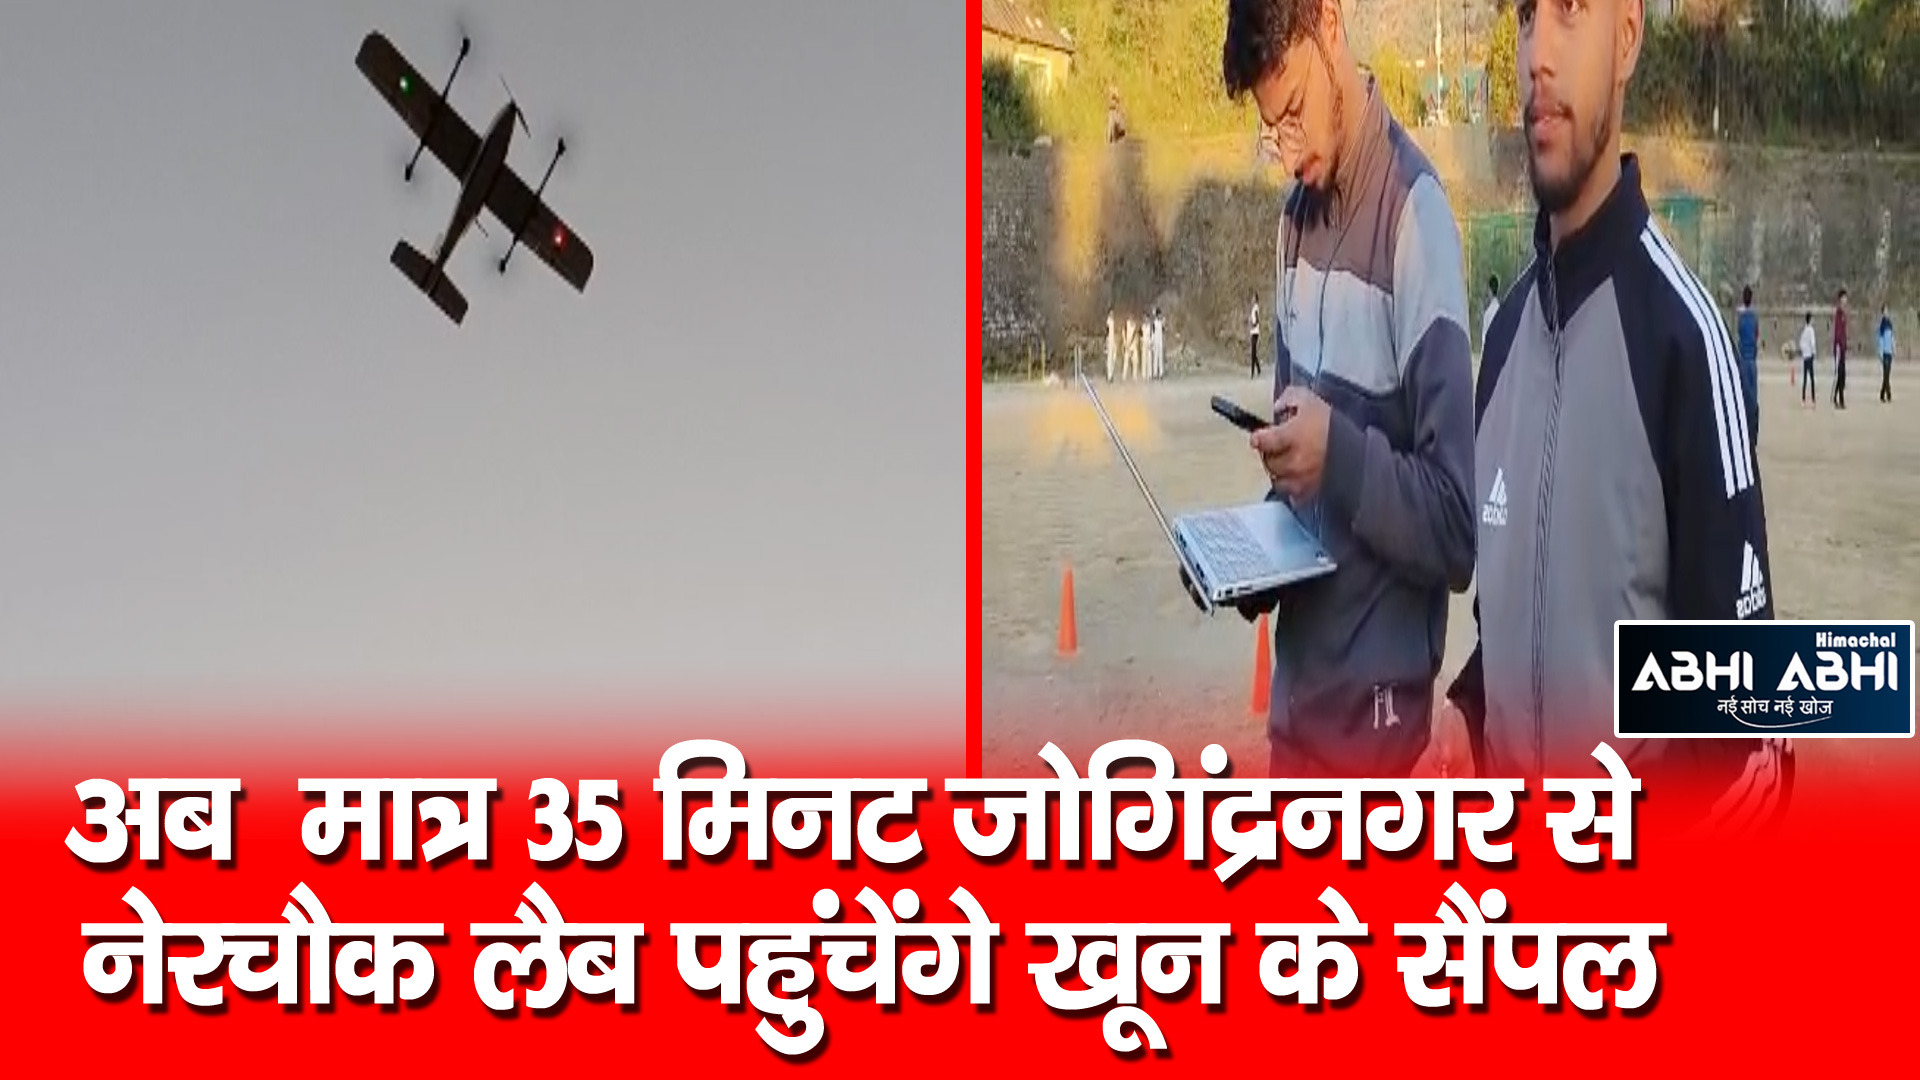 Blood samples || Drone || Nerchowk